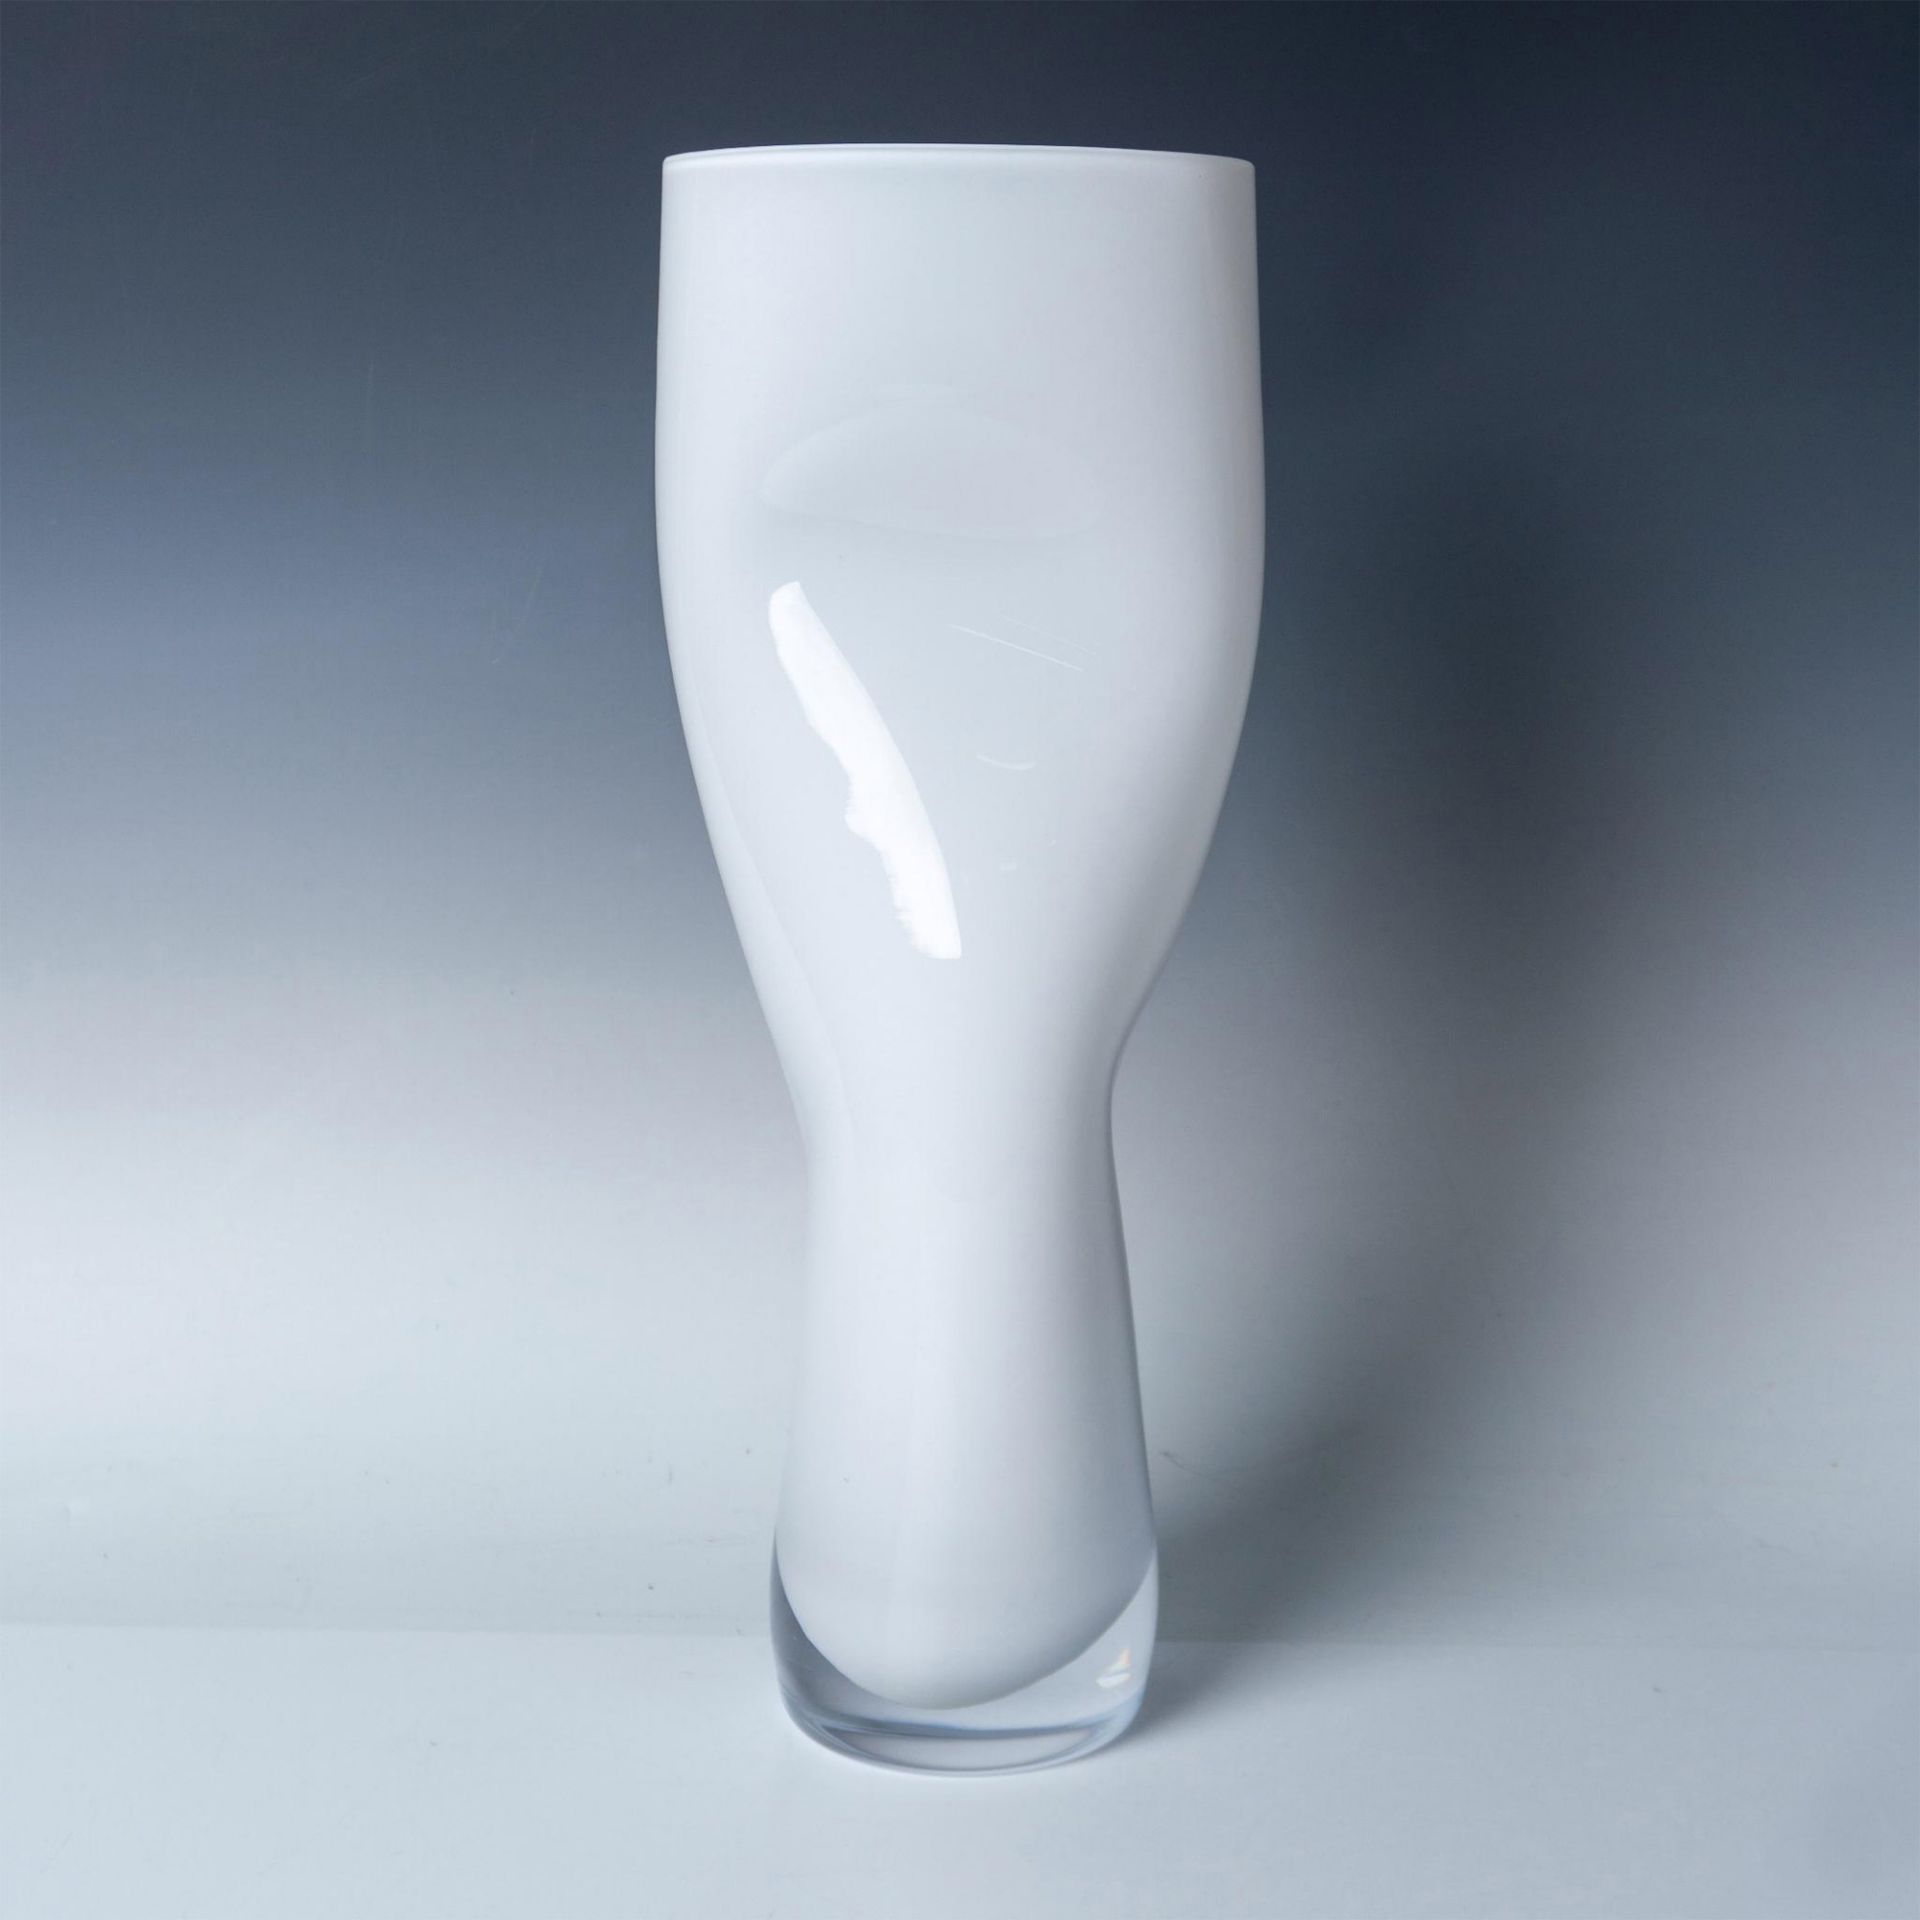 Orrefors Crystal Vase Squeeze White Tall - Image 2 of 4